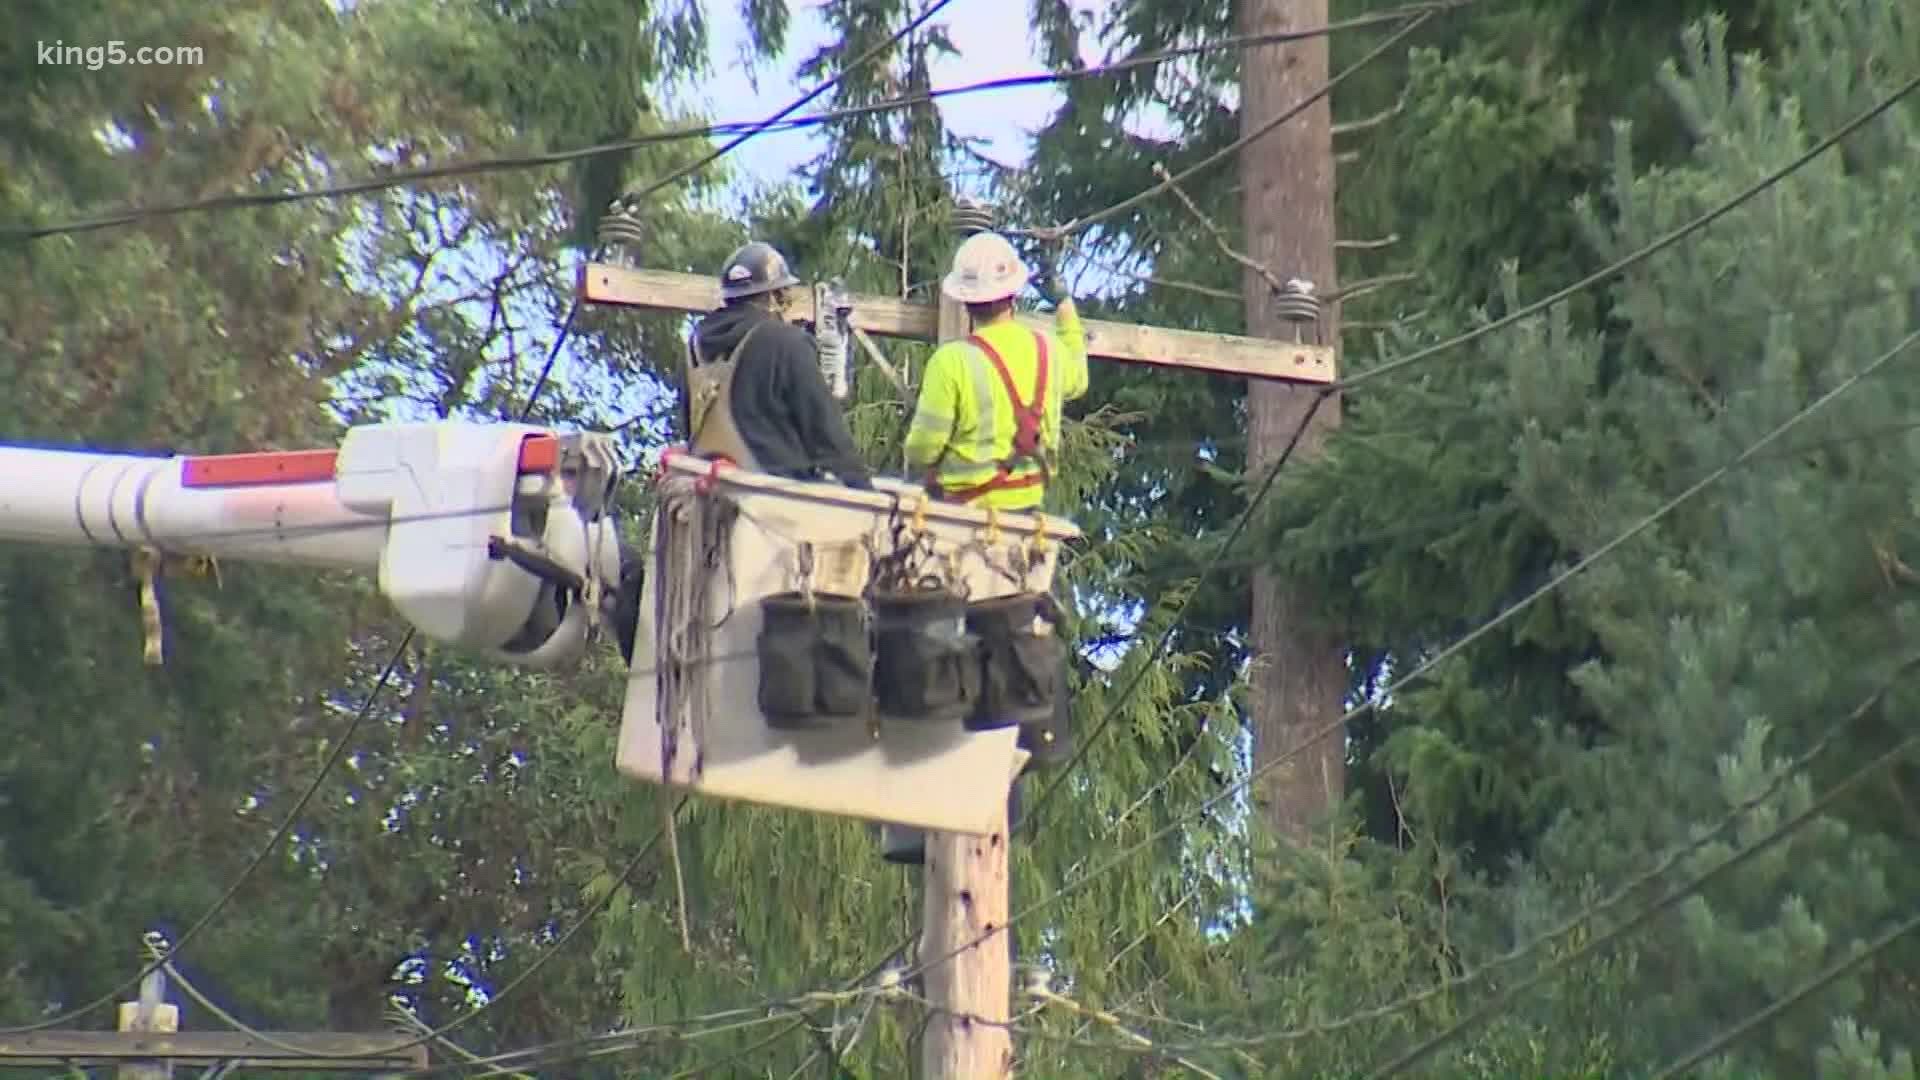 Some have been without electricity for four days, after strong winds in the region this week.